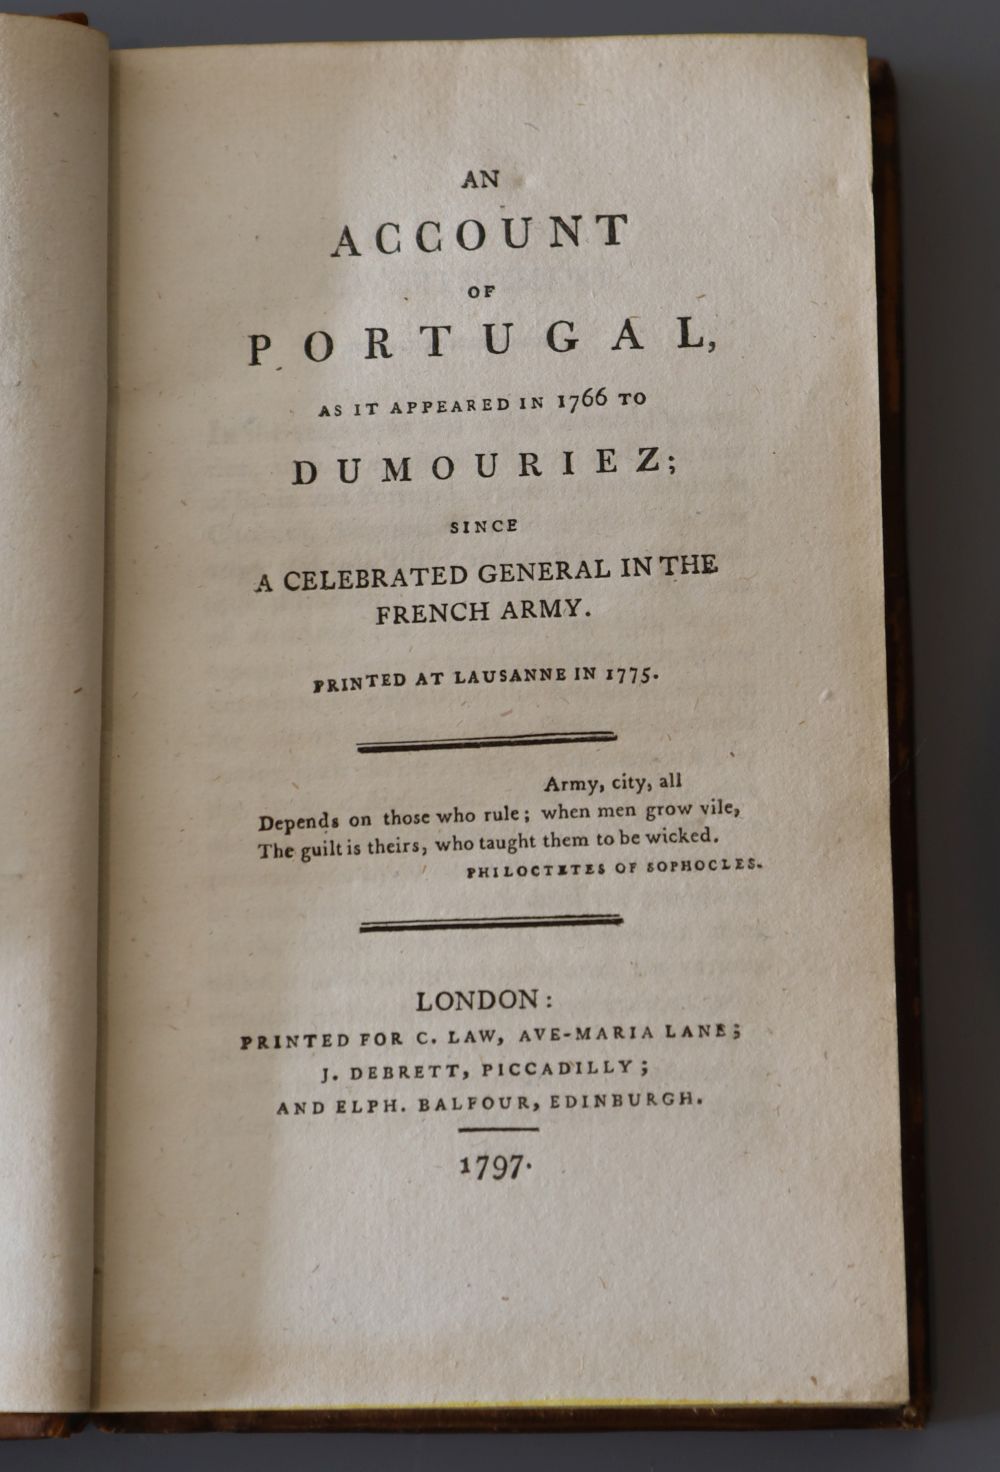 Dumouriez, Charles Francois Du Perier, 1739-1823 - Account of Portugal as it appeared in 1766, calf, 8vo, printed for C. Law, London, 1